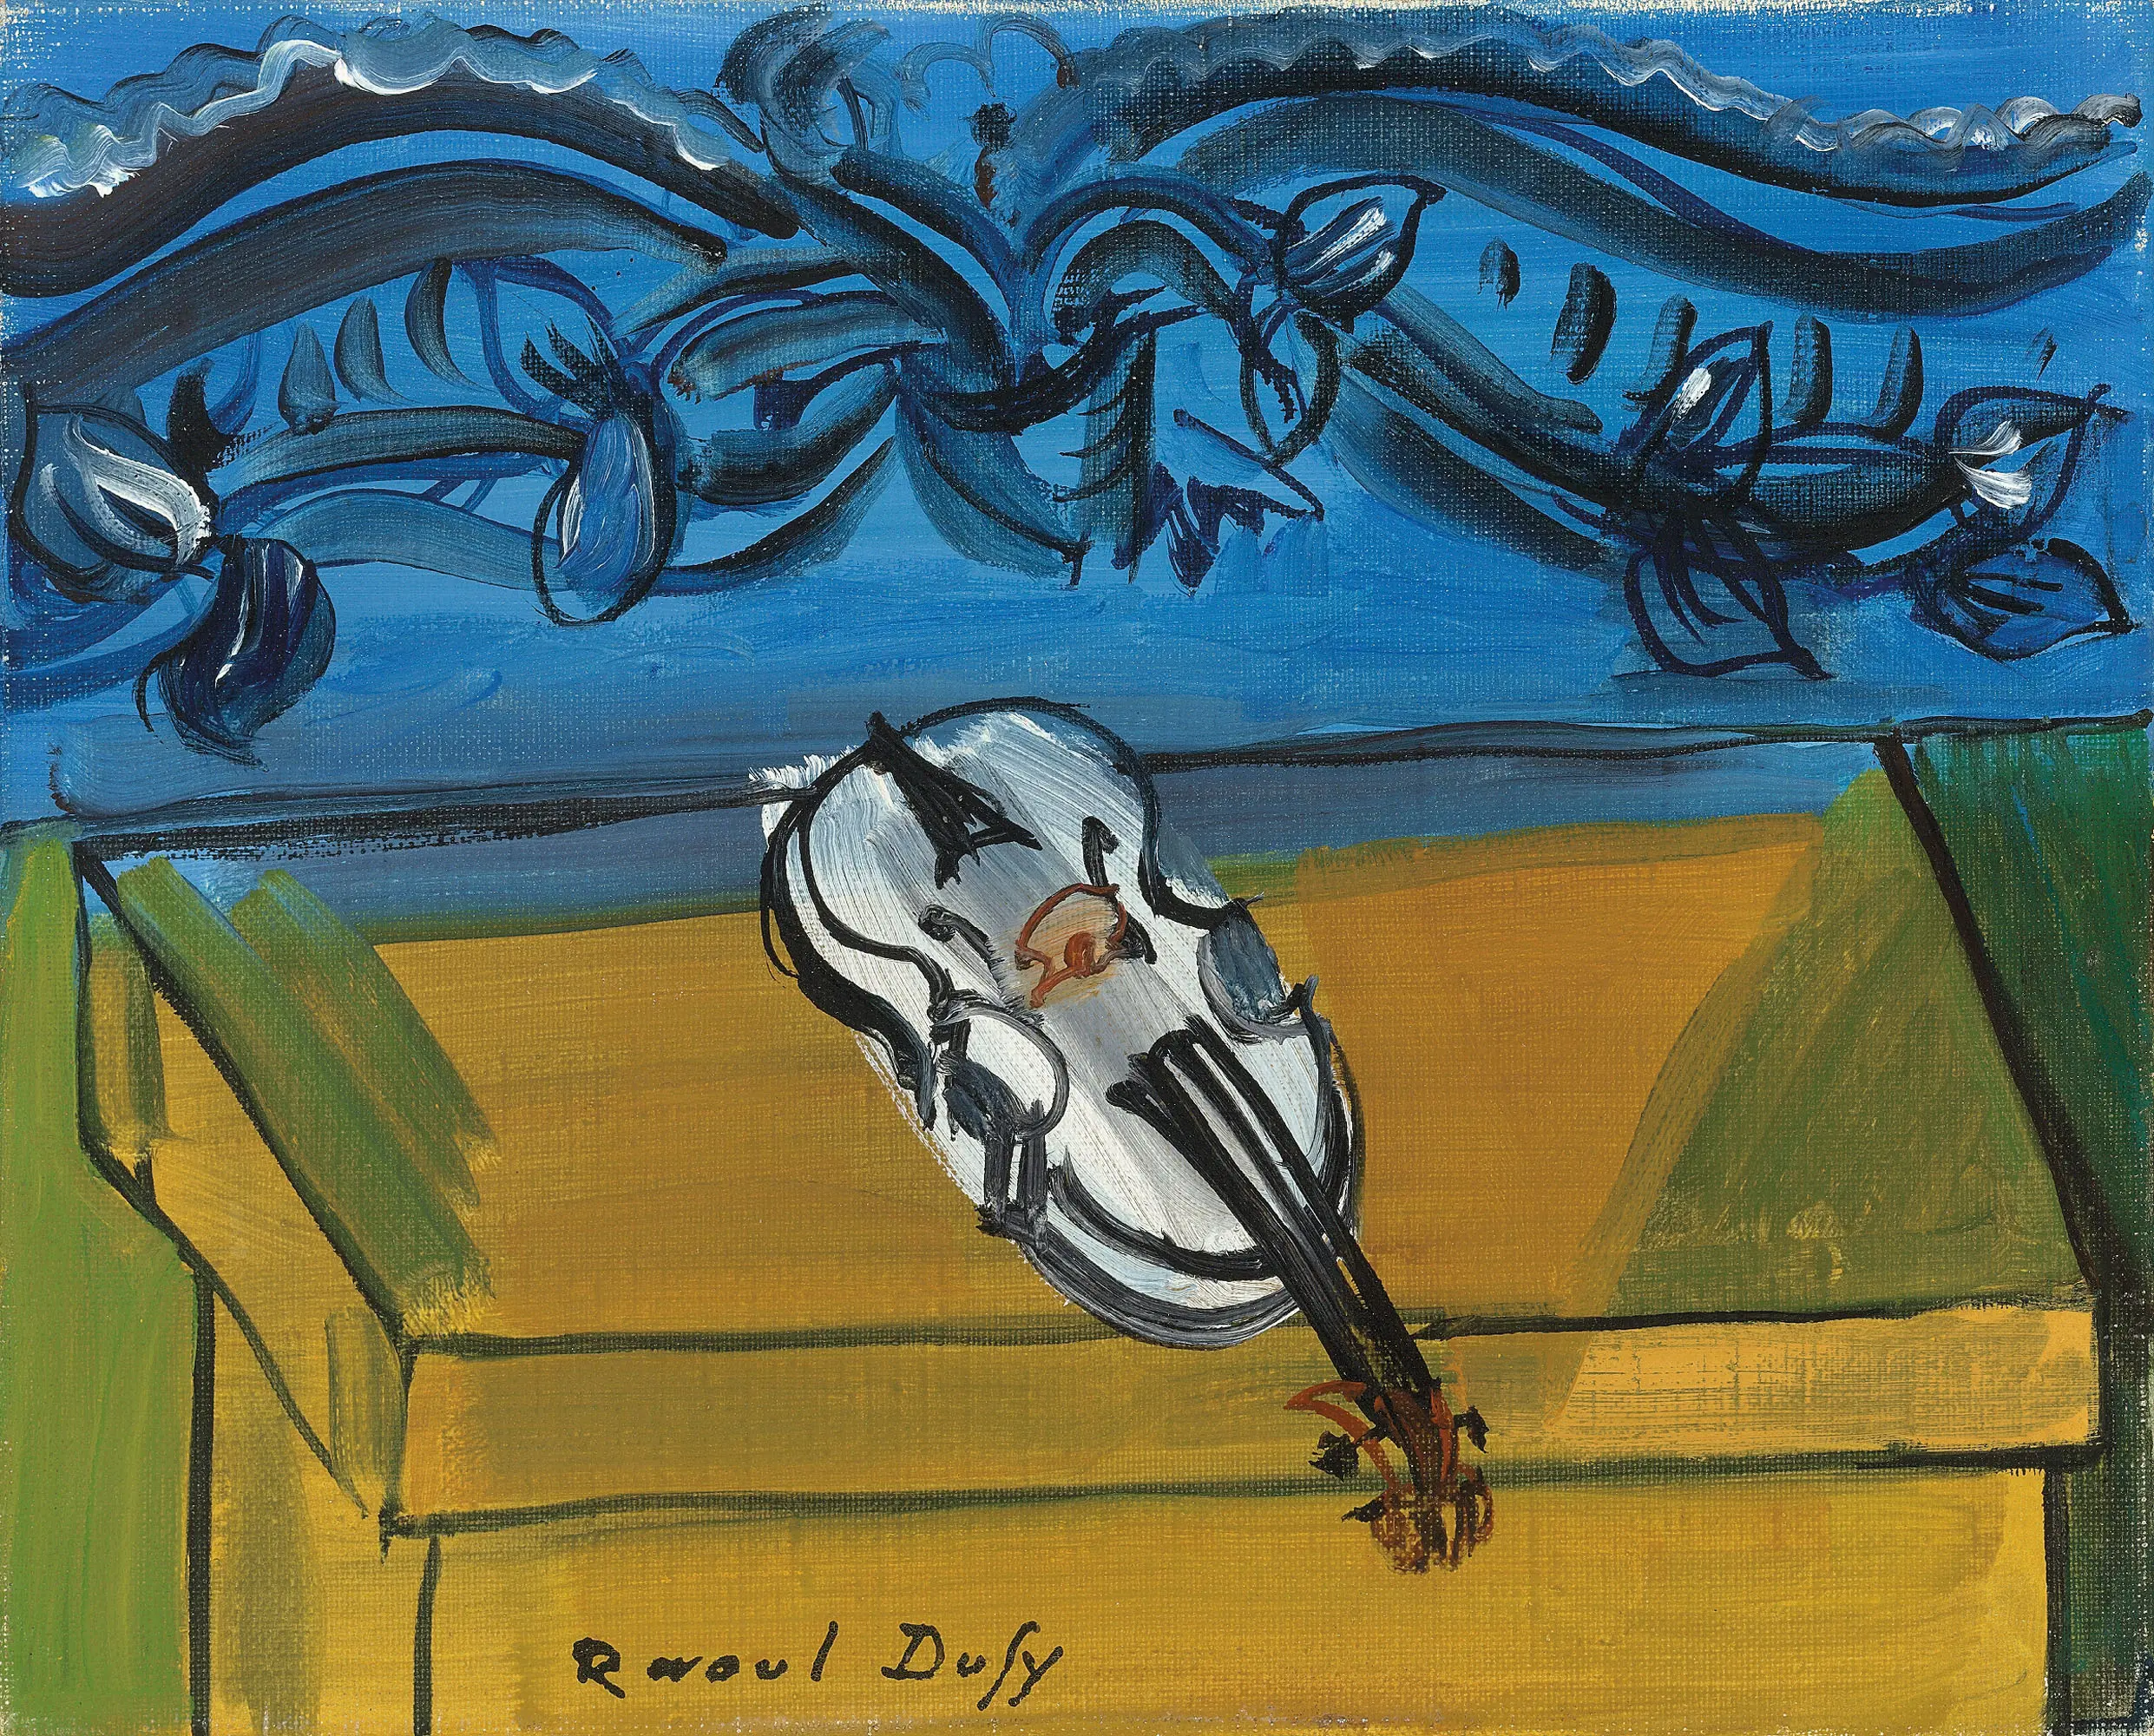 raoul dufy violin - What are some interesting facts about Raoul Dufy